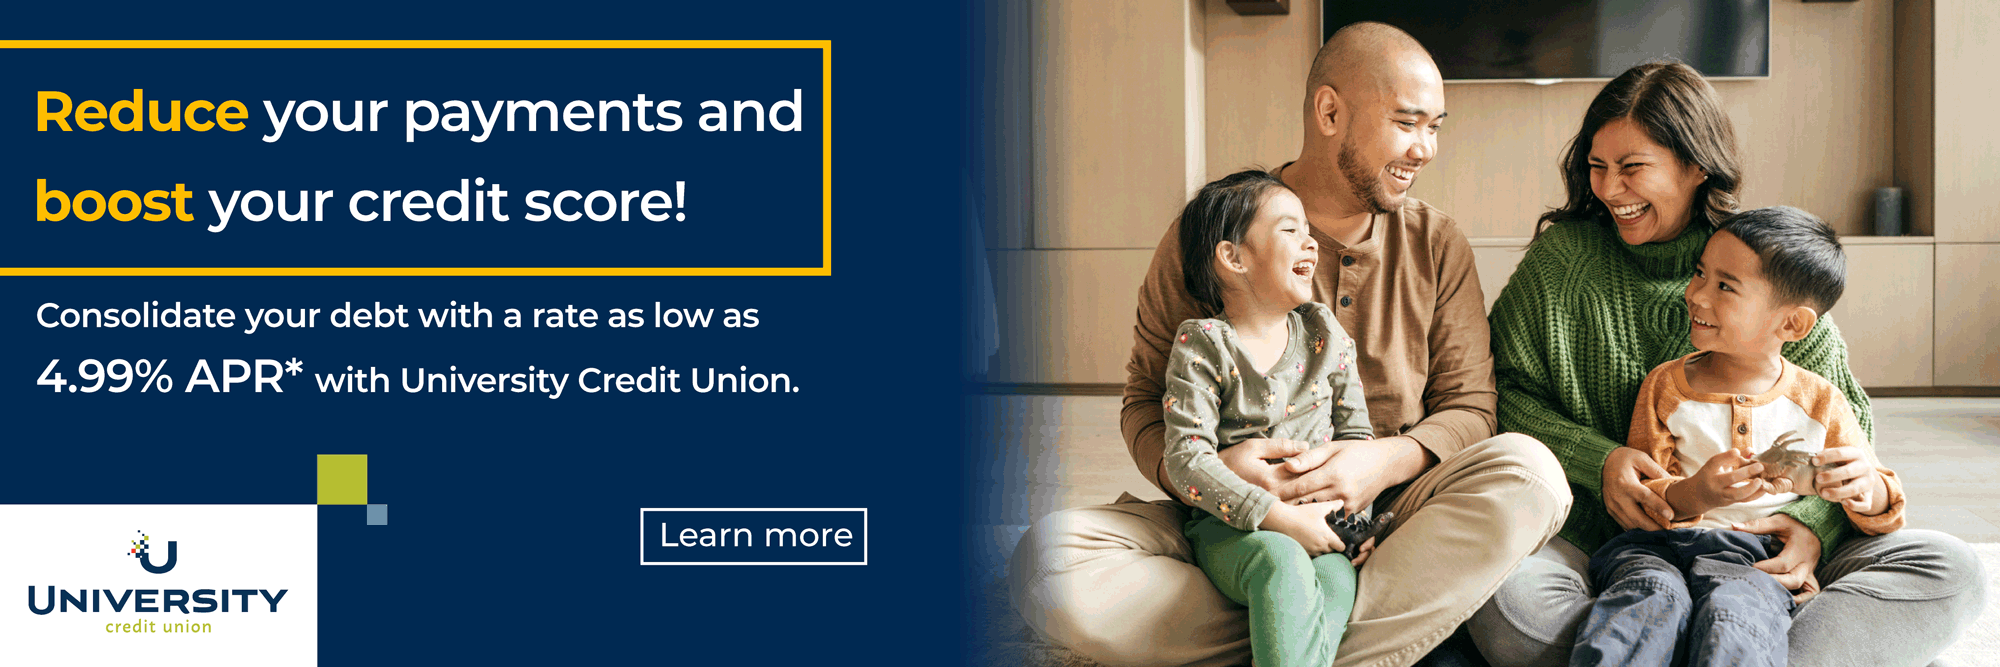 Reduce your payments and boost your credit score! Consolidate yourdebt with a rate as low as 4.99% APR* with University Credit Union. Learn More